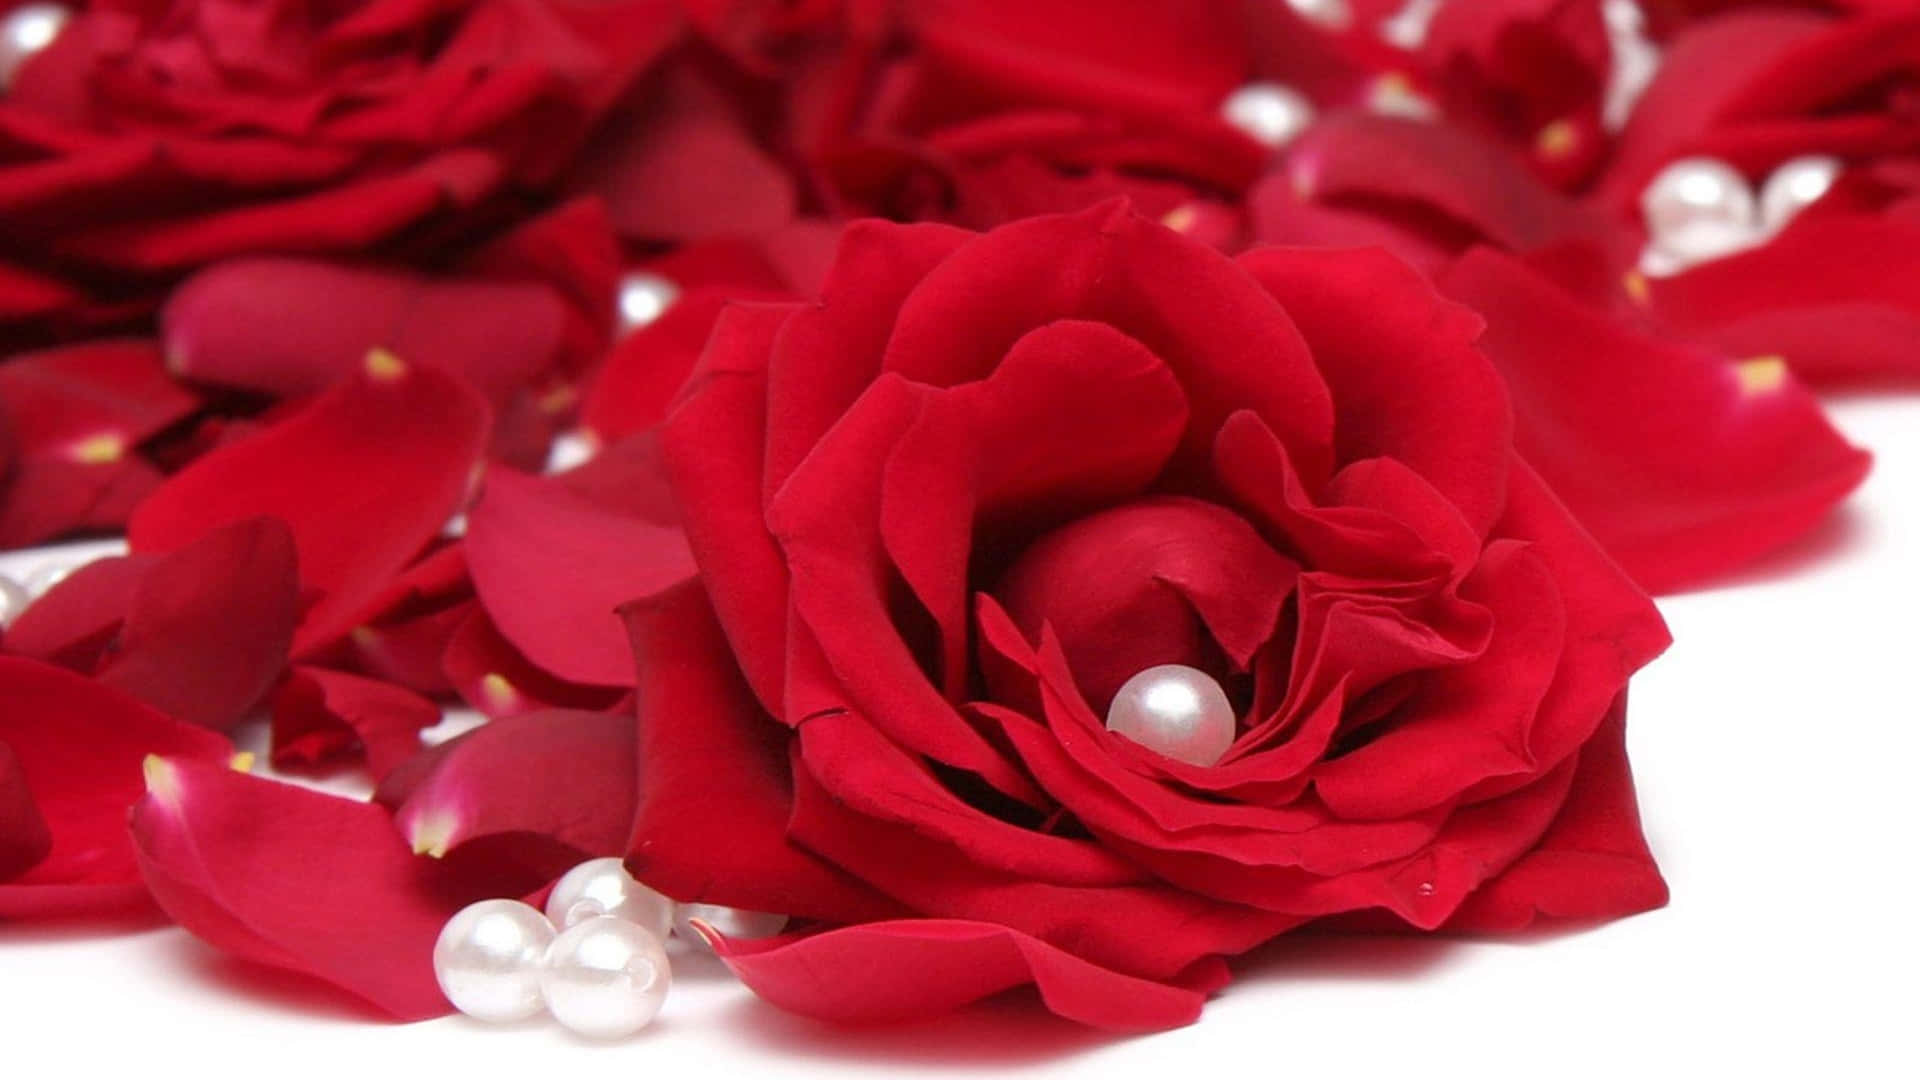 1080p Red Roses With Pearls Background